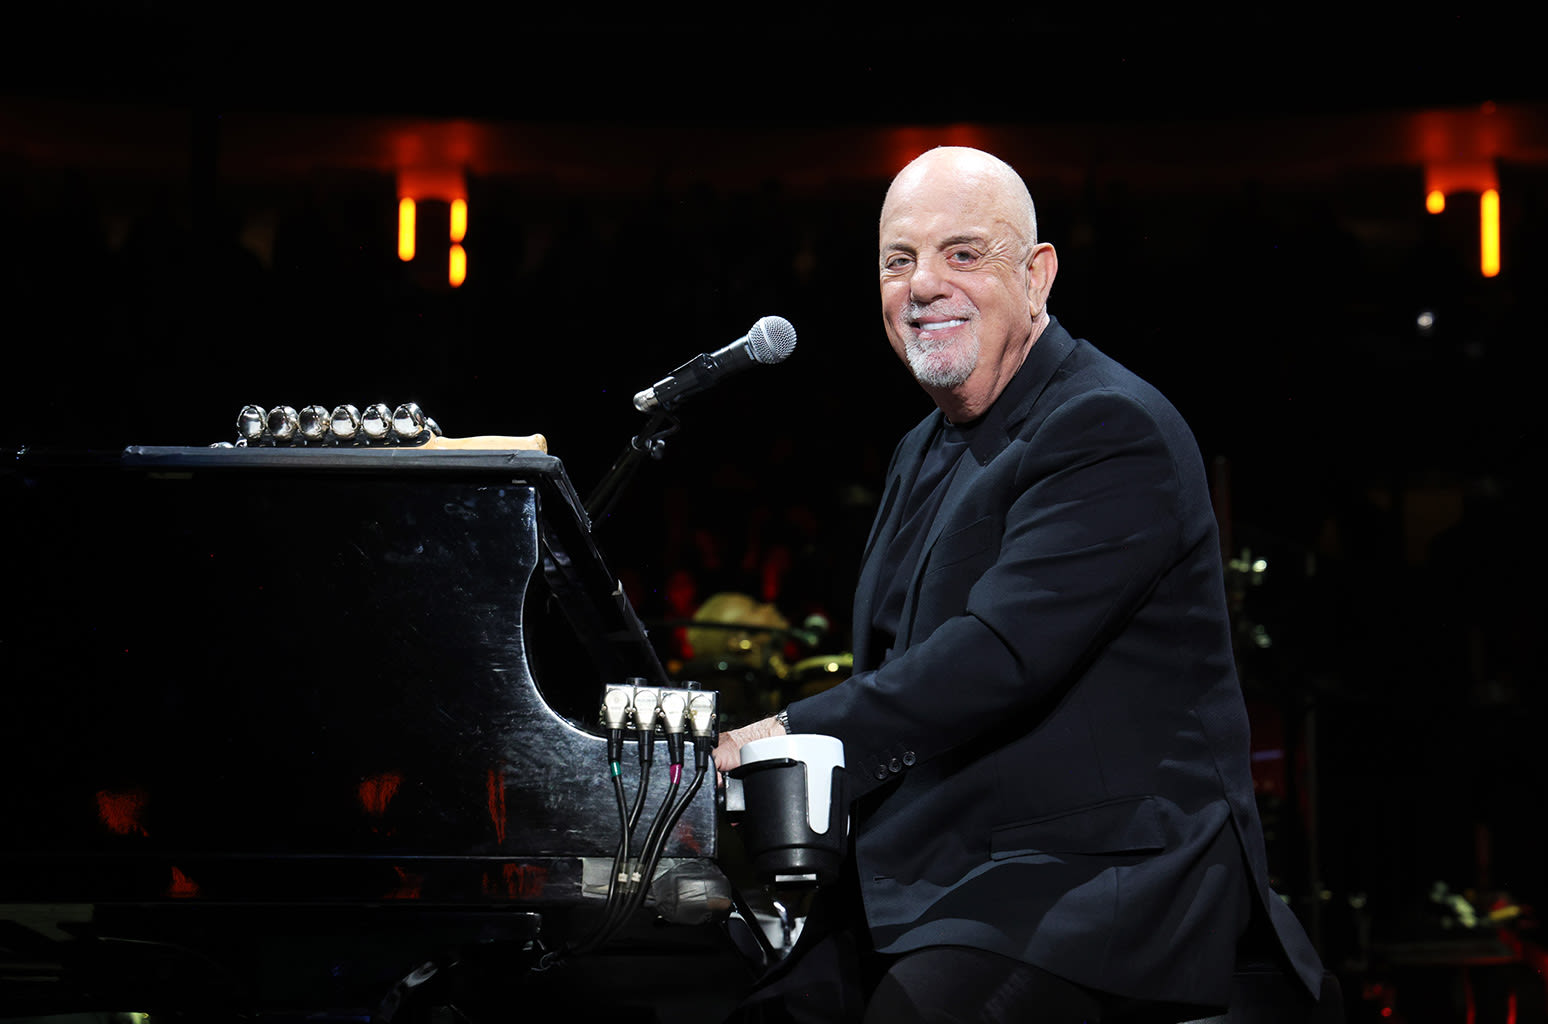 Axl Rose Joins Billy Joel at Final Madison Square Garden Residency Gig For AC/DC, Wings Covers